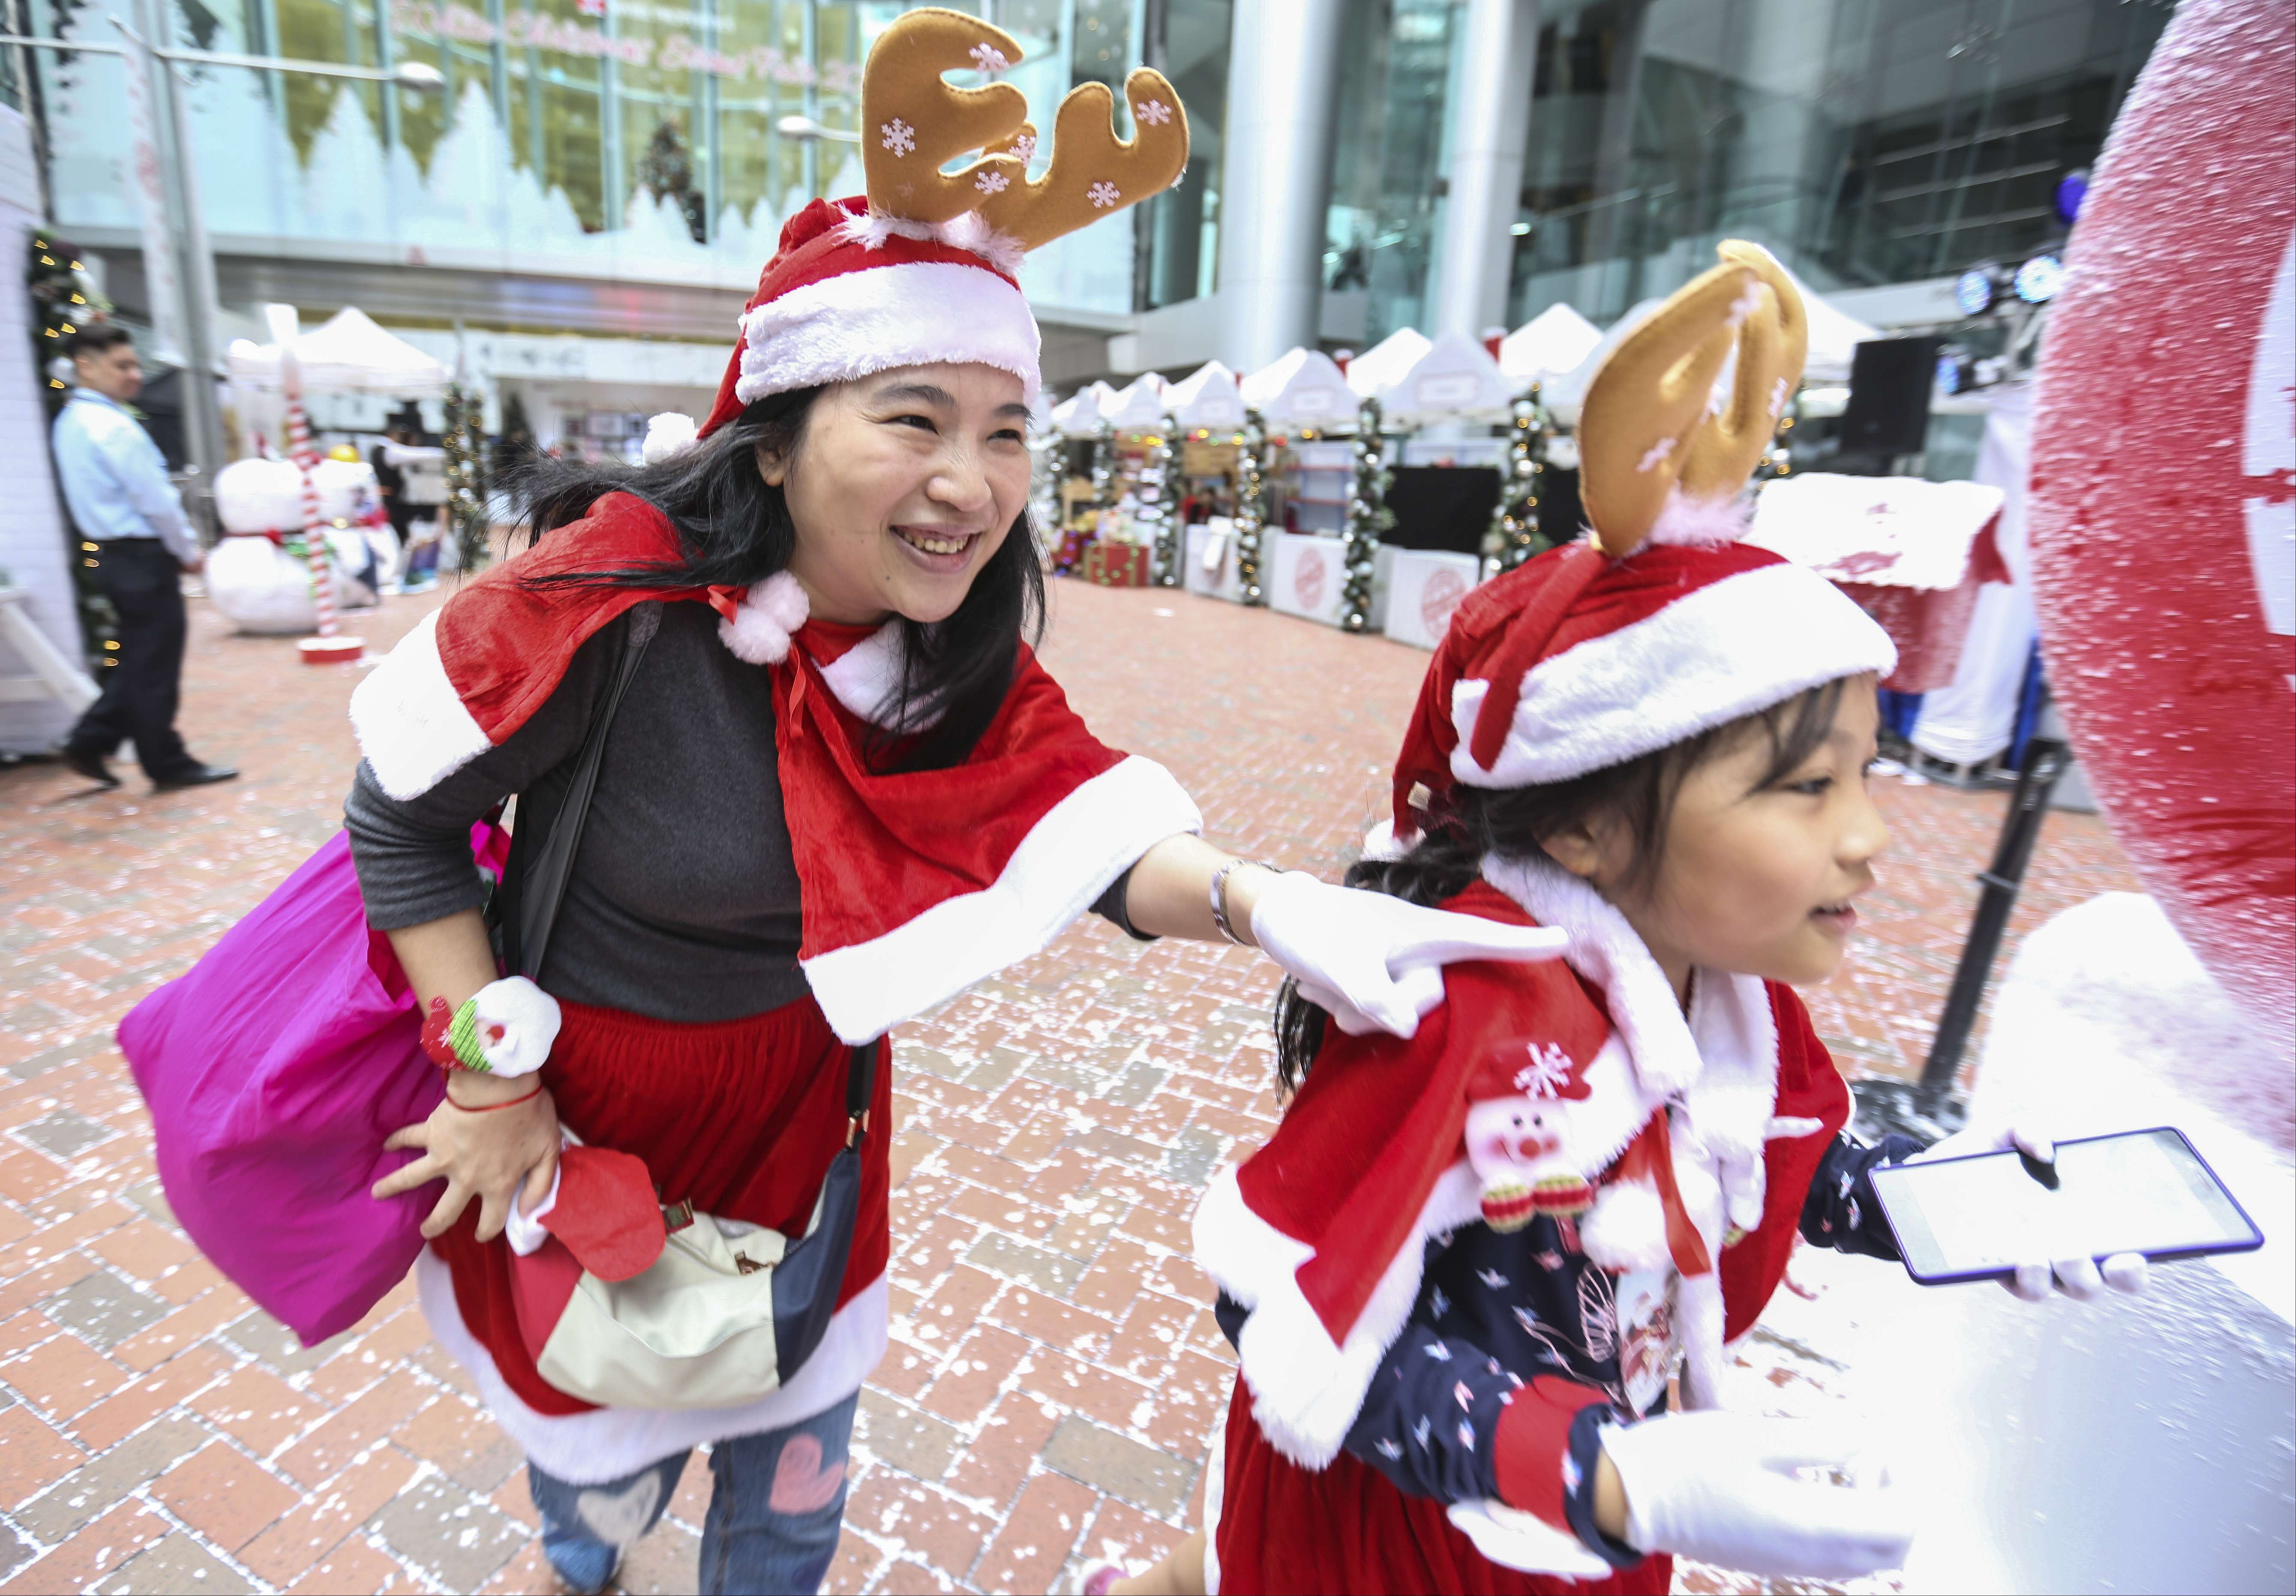 Swire’s annual Santathon ChallengeThe event saw two hundred teams, including parents and children dressed as Santas, competing to win in eight digital mini-games this year. Photo: Xiaomei Chen